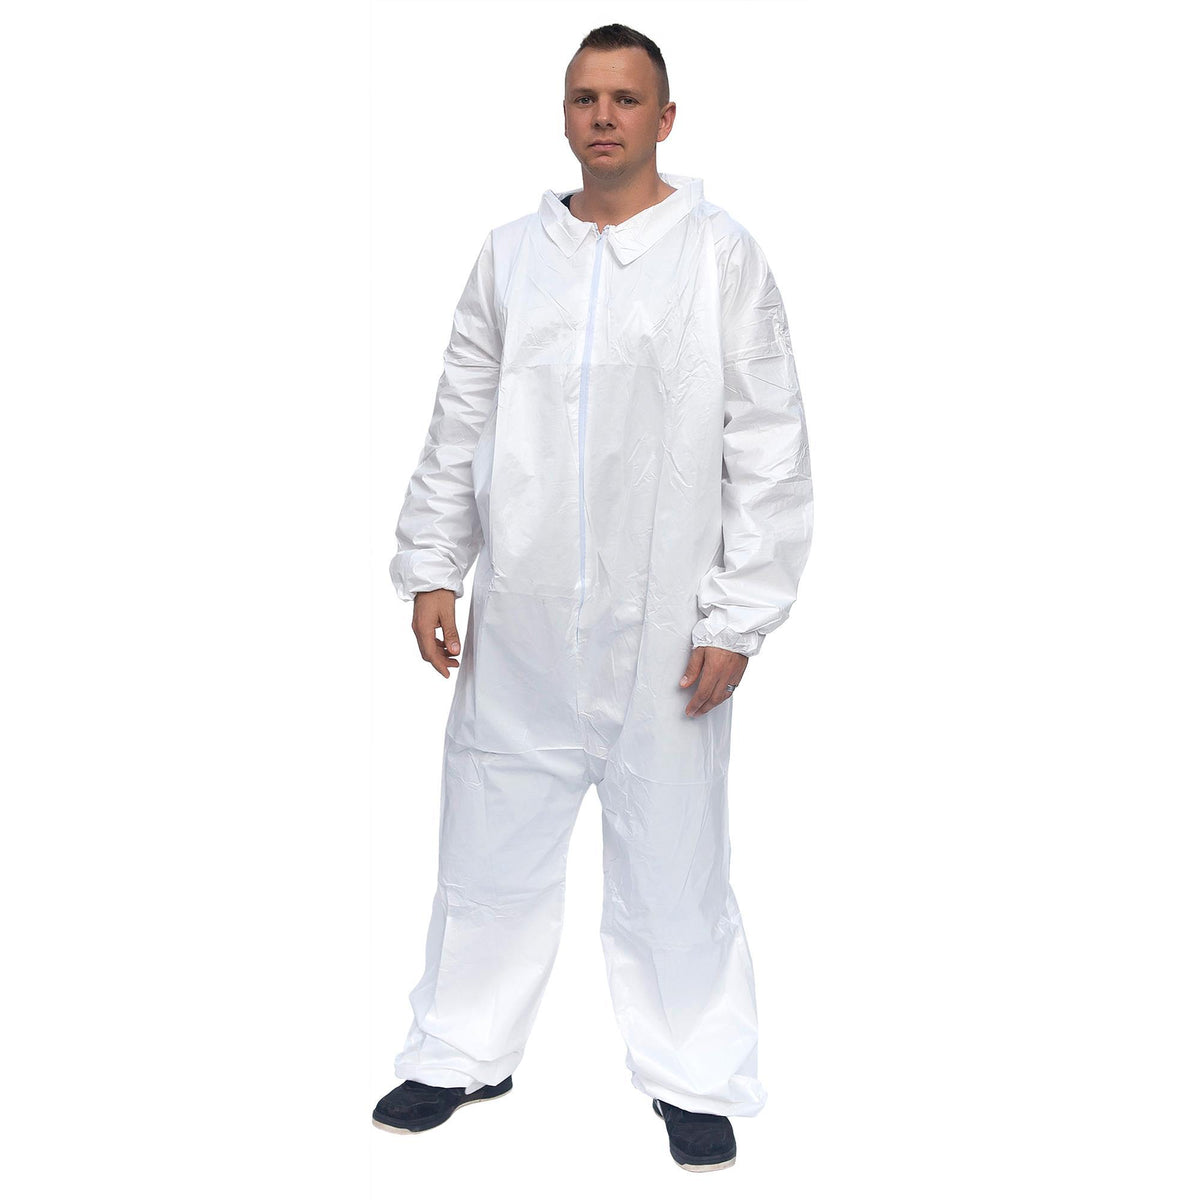 14799 PC125 Coveralls Size 3x - W-WEL148033X